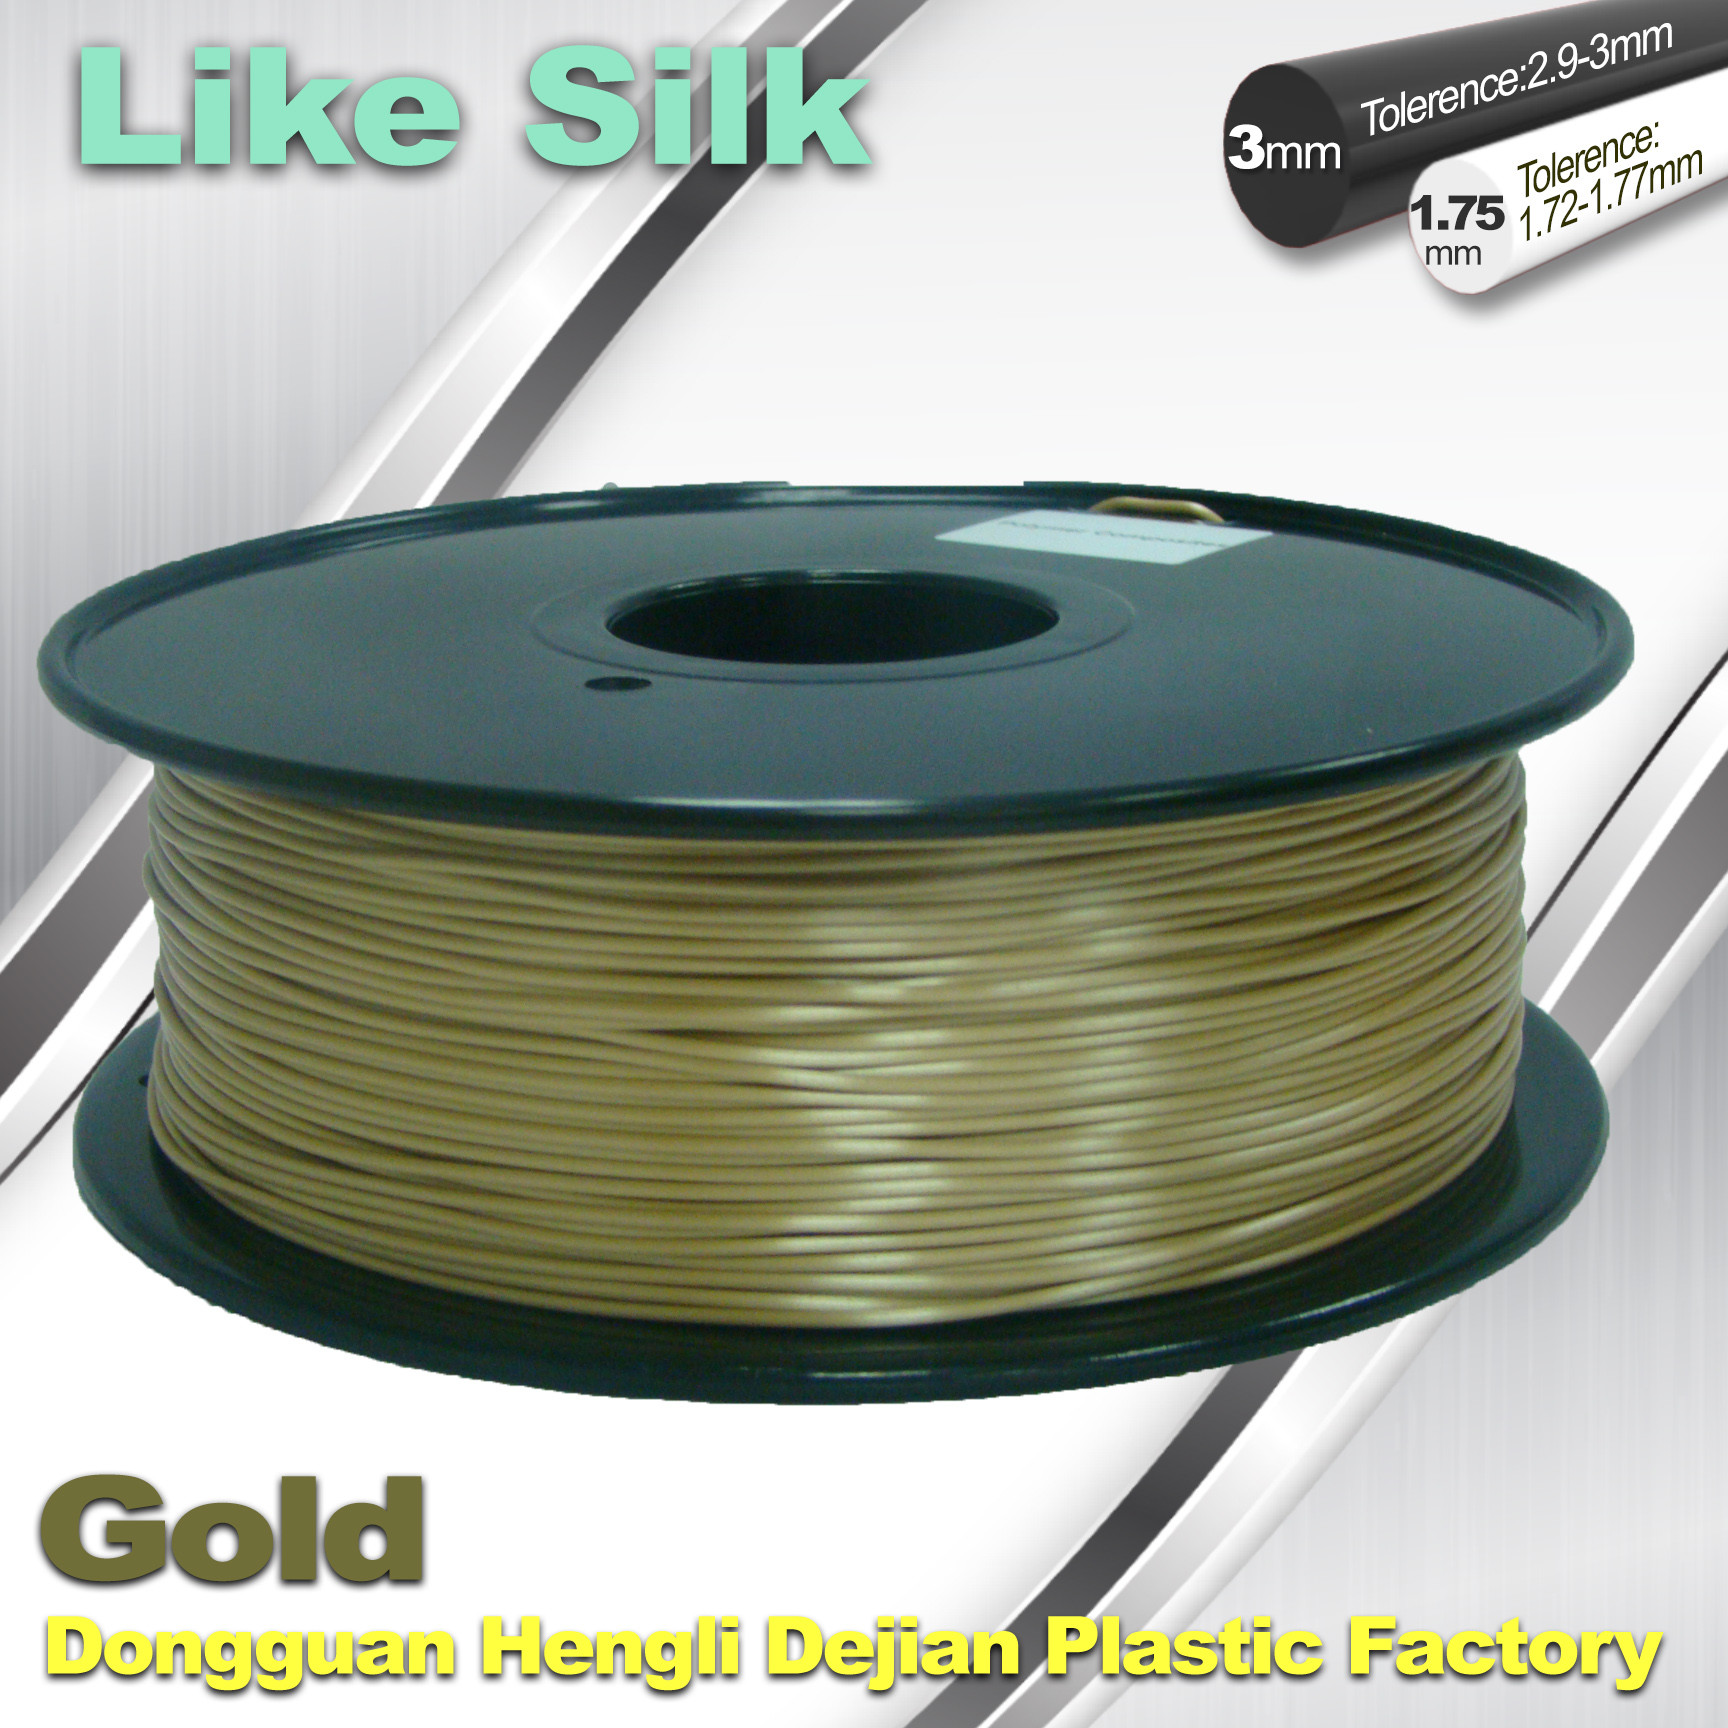 China Polymer Composites 3D Printer Filament , 1.75mm / 3.0mm , Gold Colors. Like Silk Filament wholesale